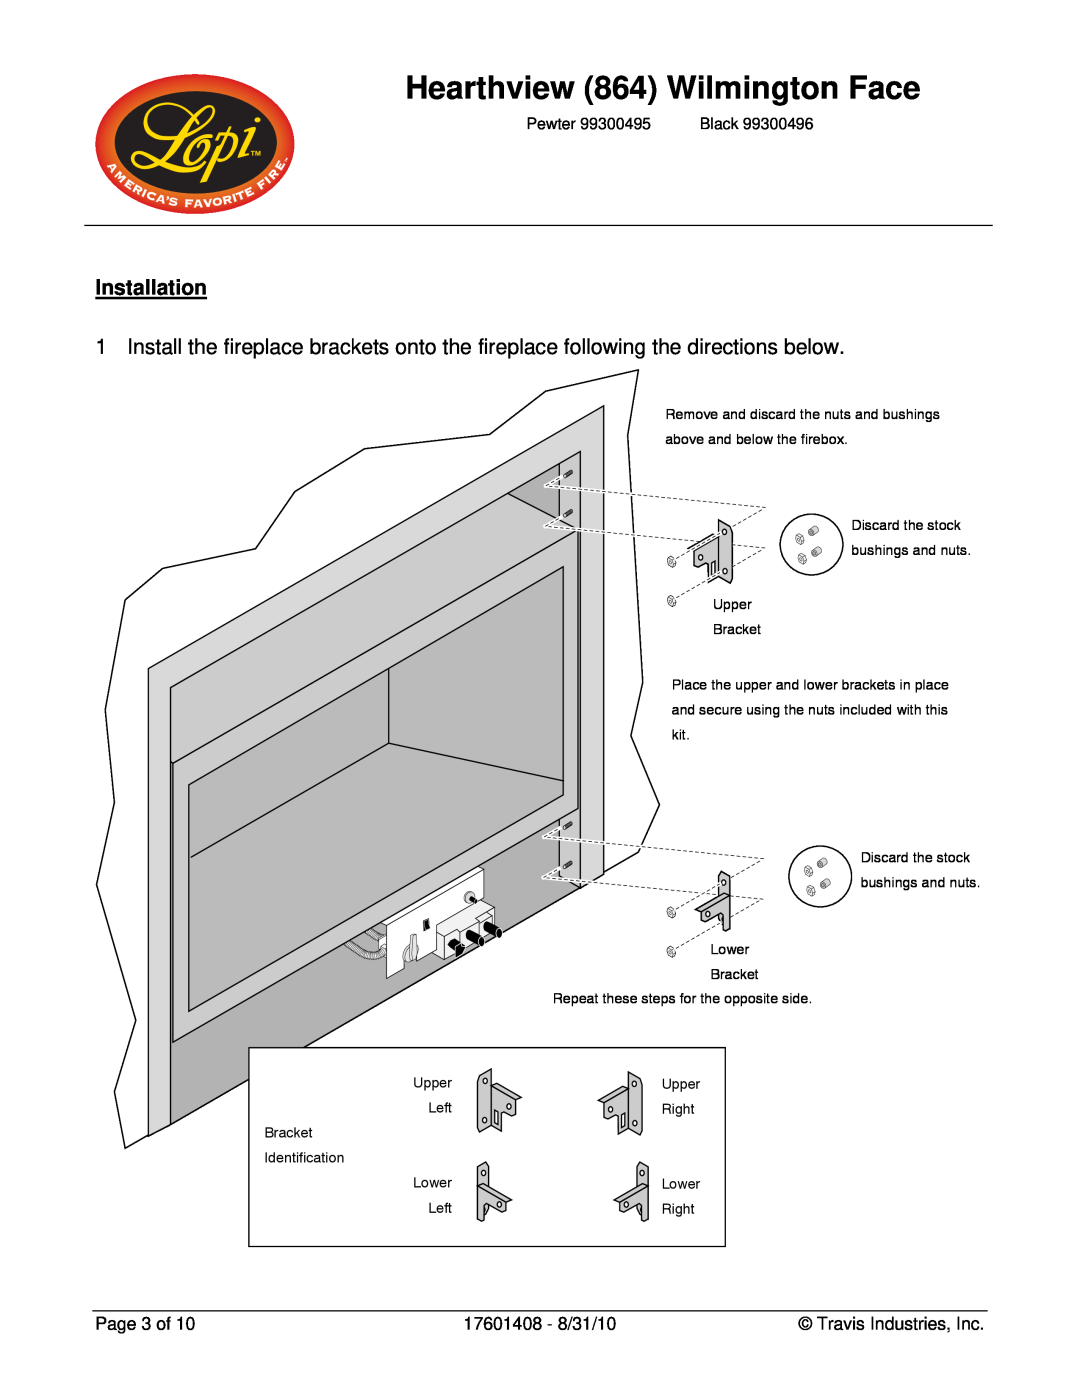 Lopi PEWTER 99300495 Installation, Hearthview 864 Wilmington Face, Page 3 of, 17601408 - 8/31/10, Travis Industries, Inc 